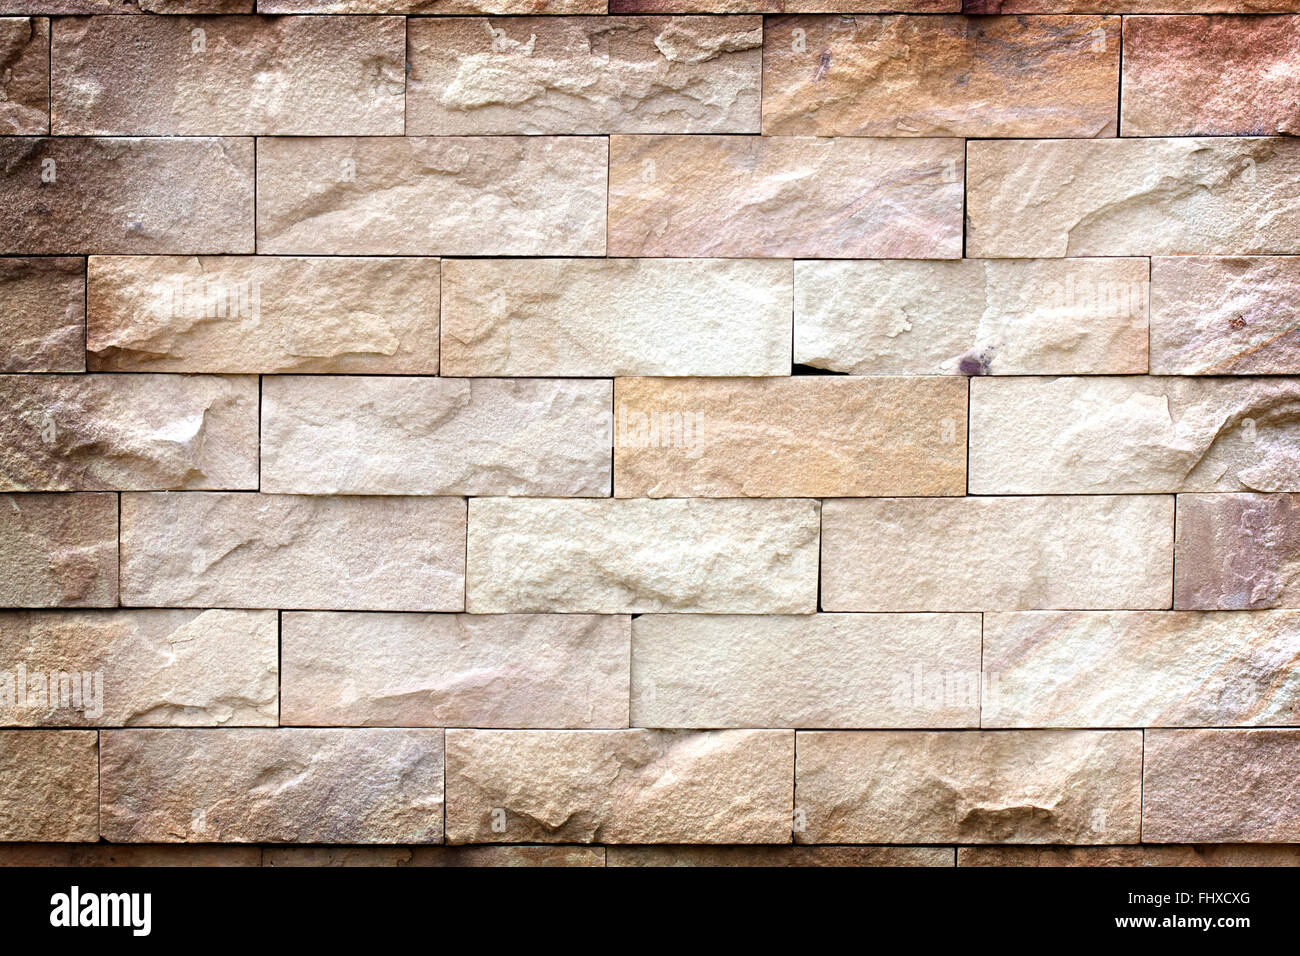 Texture of stone walls, exterior durability. Construction materials industry Stock Photo